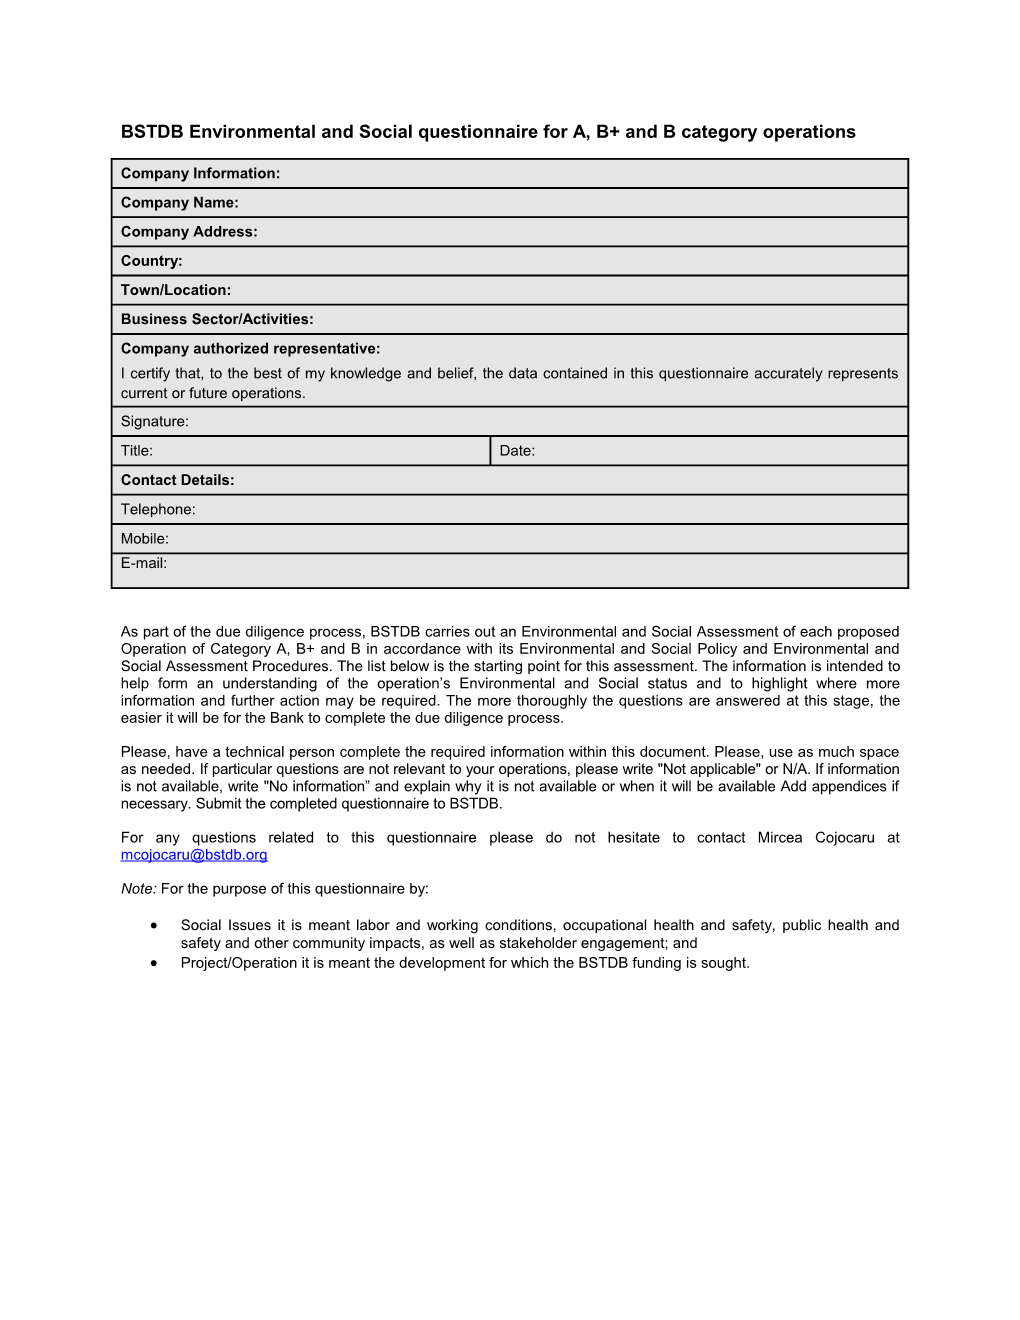 BSTDB Environmental and Social Questionnaire for A, B+ and B Category Operations